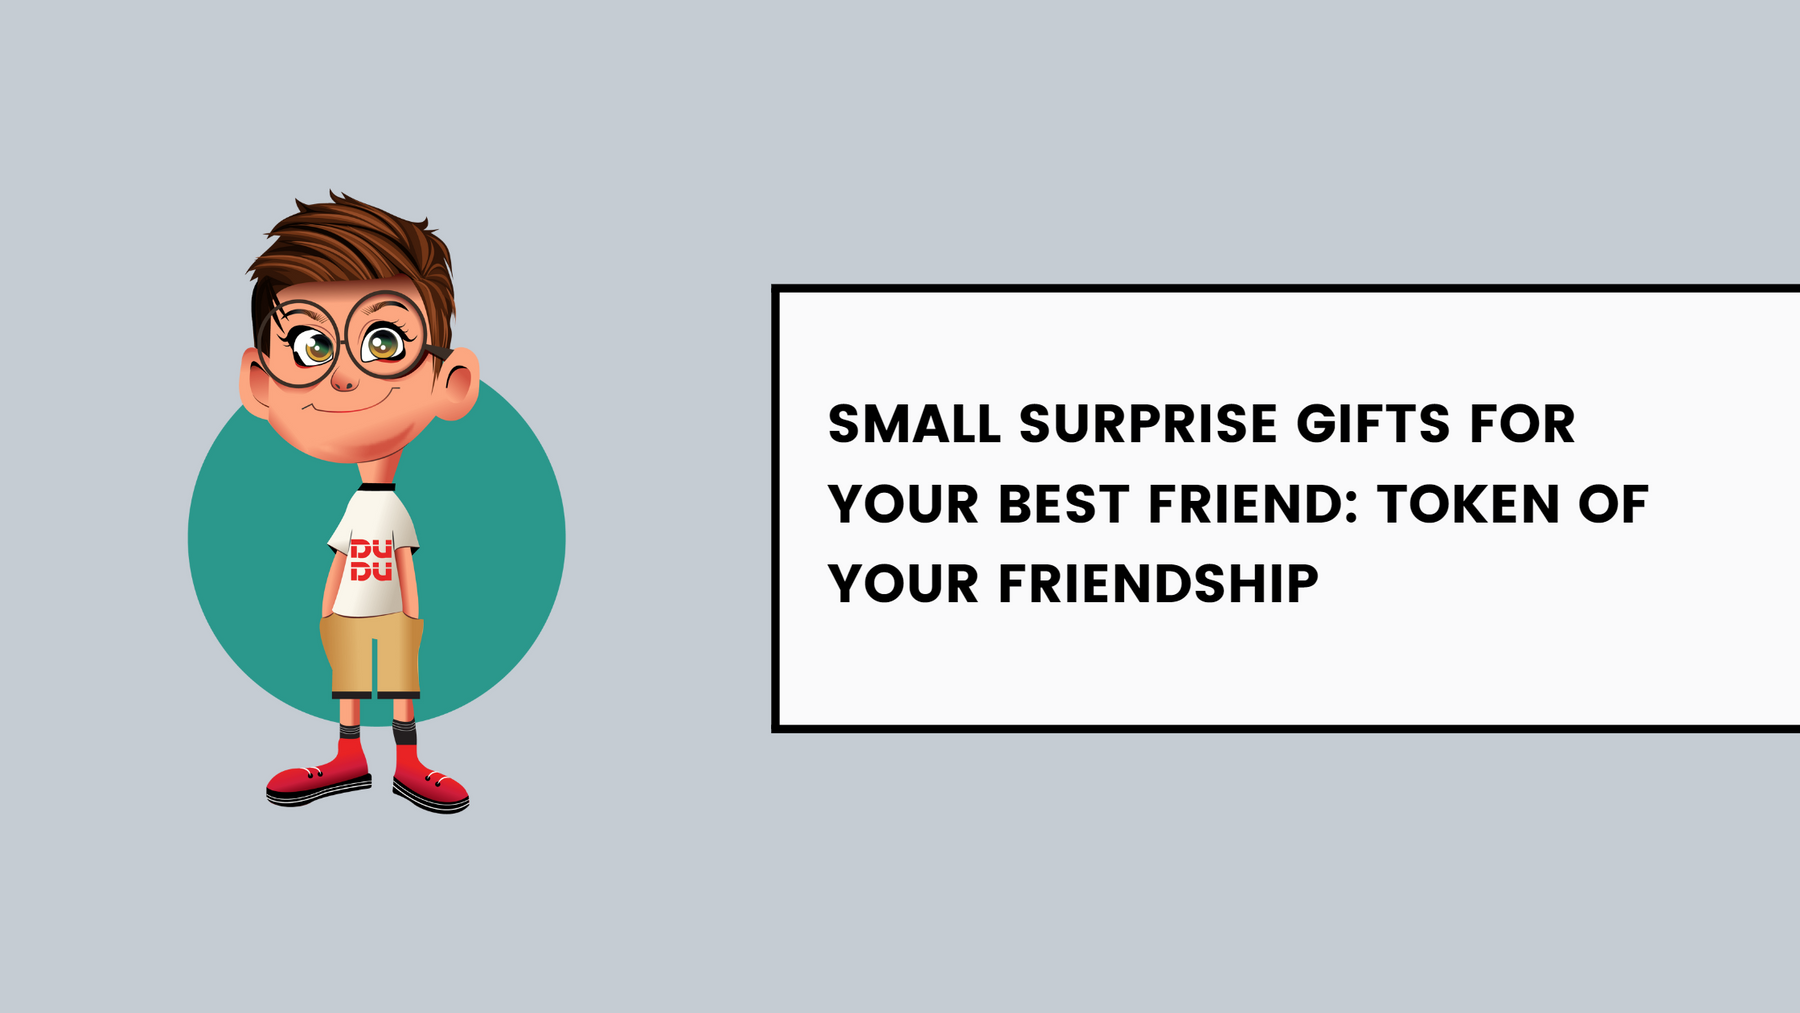 Small Surprise Gifts For Your Best Friend: Token Of Your Friendship